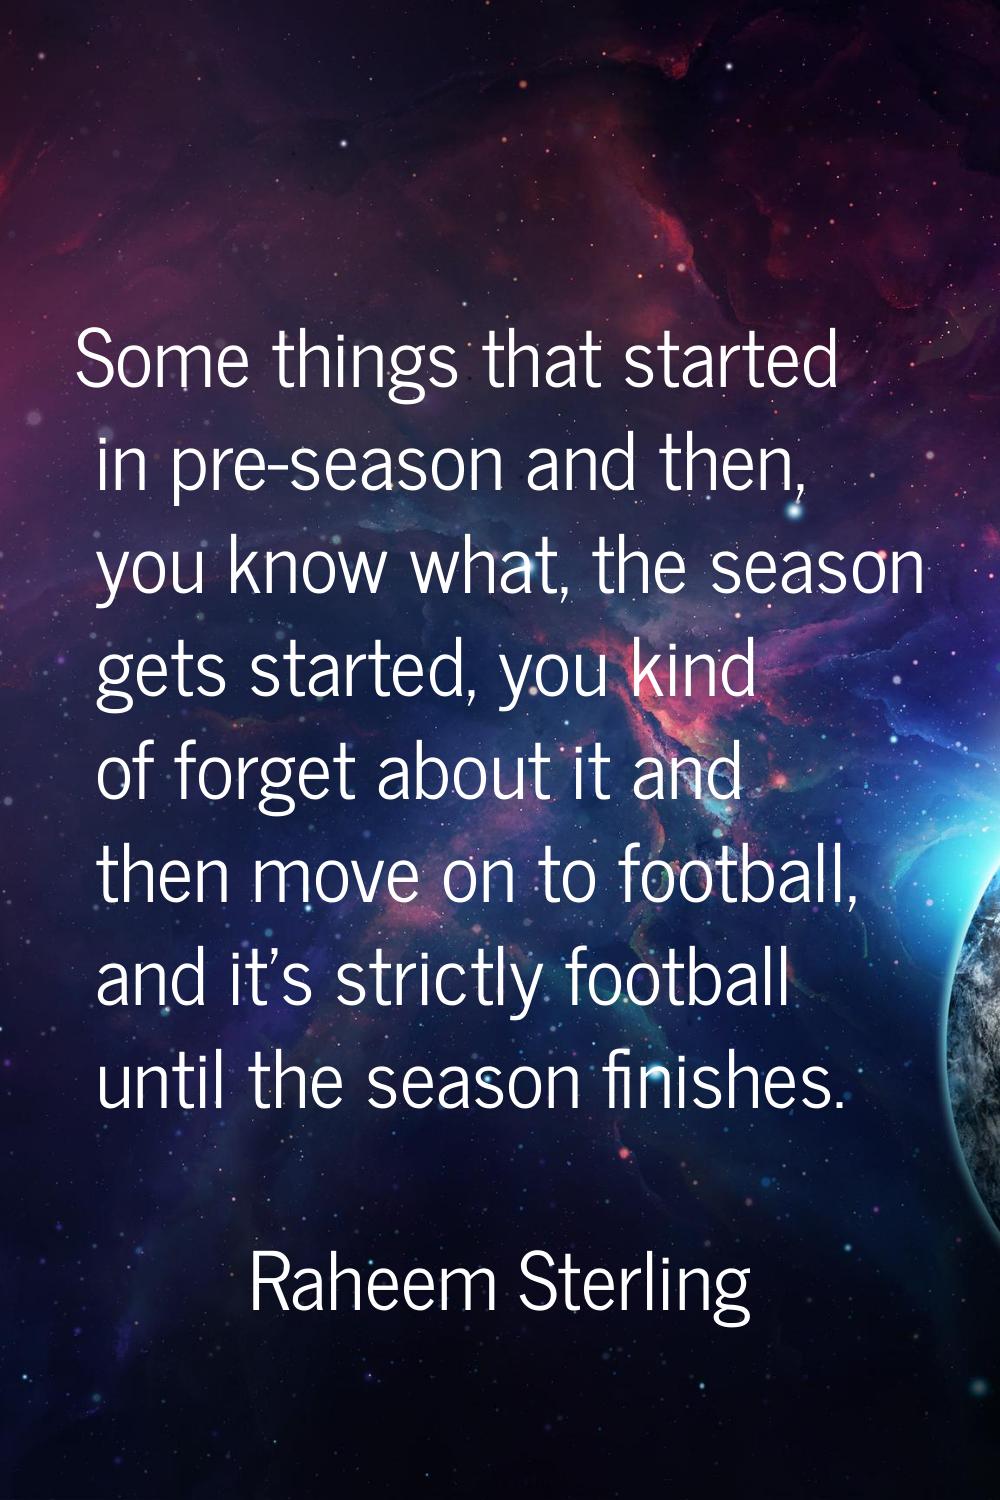 Some things that started in pre-season and then, you know what, the season gets started, you kind o